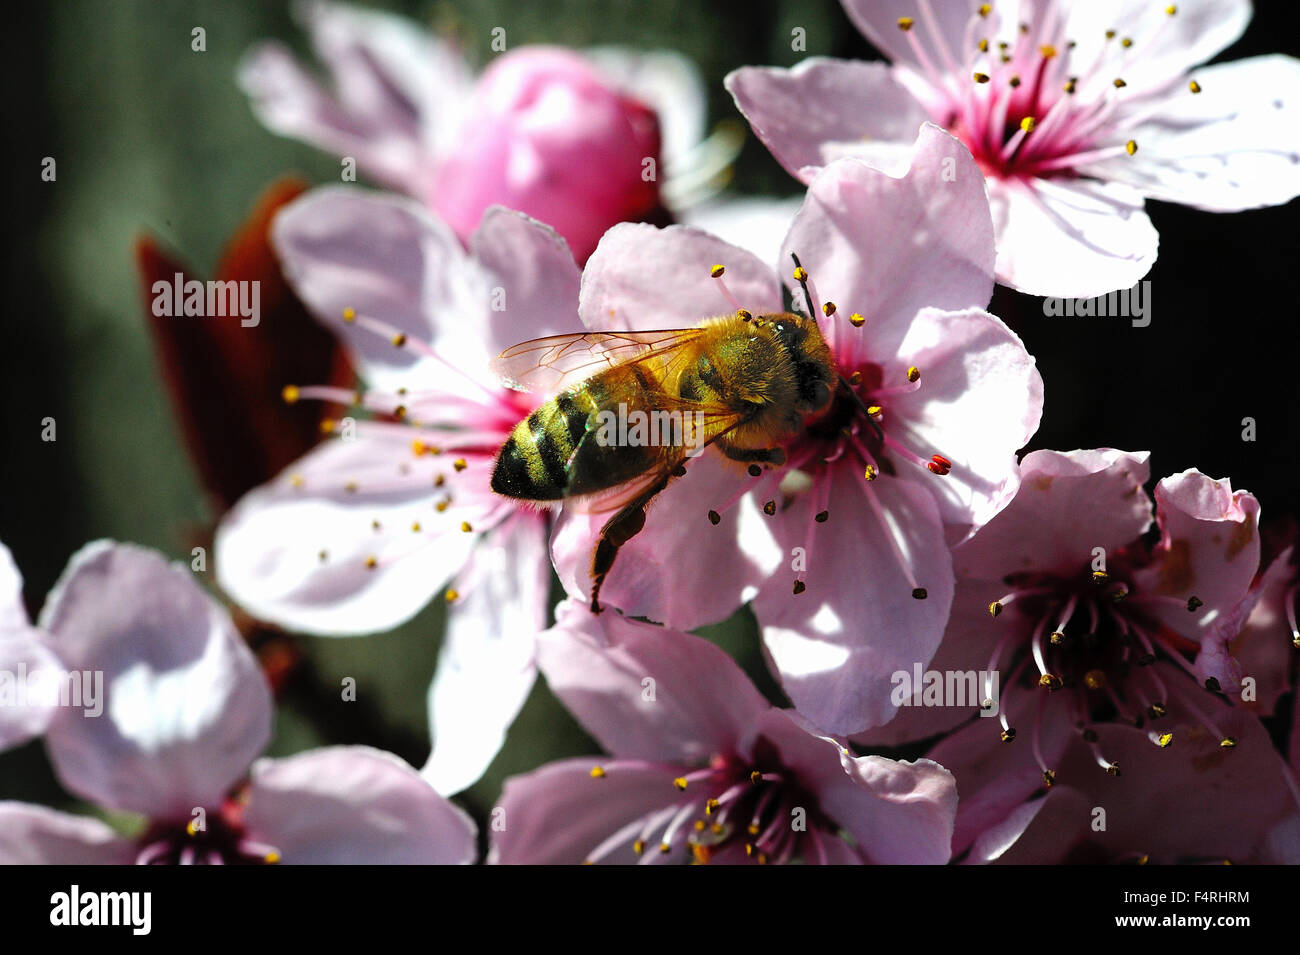 Germany, blossoms, flourishes, bees, spring, fruit blossoms, tree blossoms, blossoming, insects, pollen, flower pollen, blood pl Stock Photo